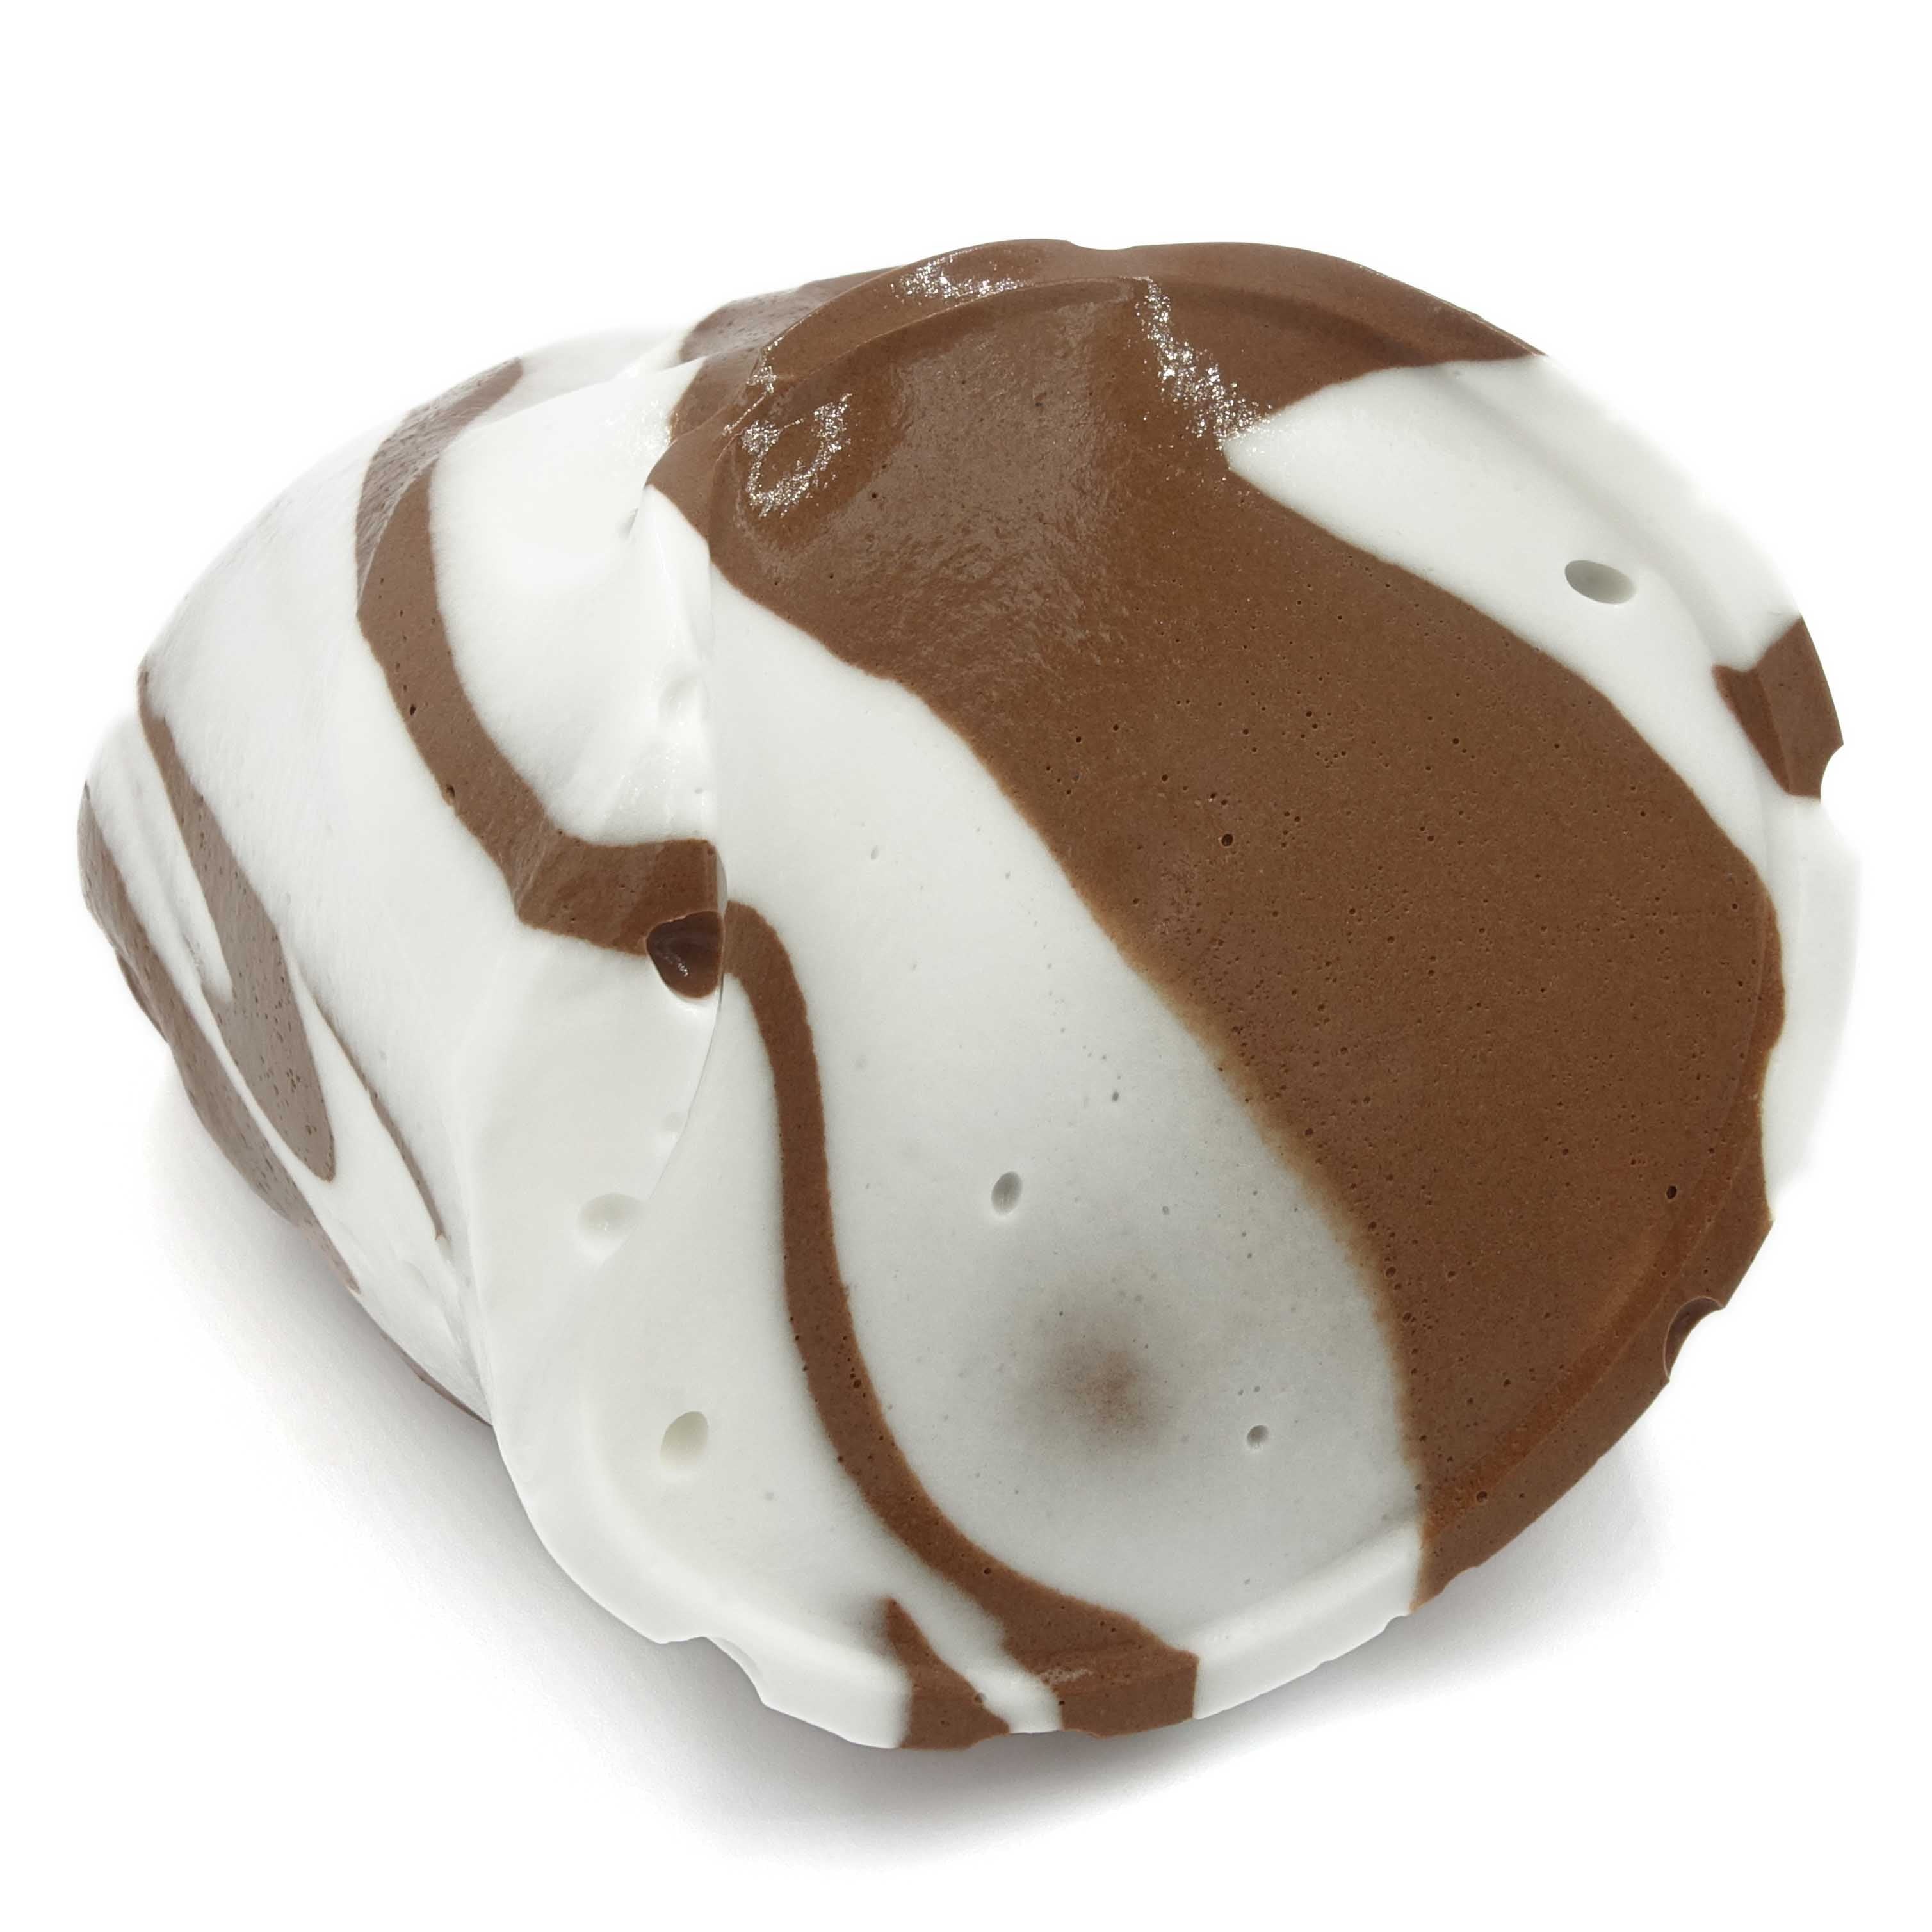 Edible SMORE Chocolate Slime Recipe with Marshmallows